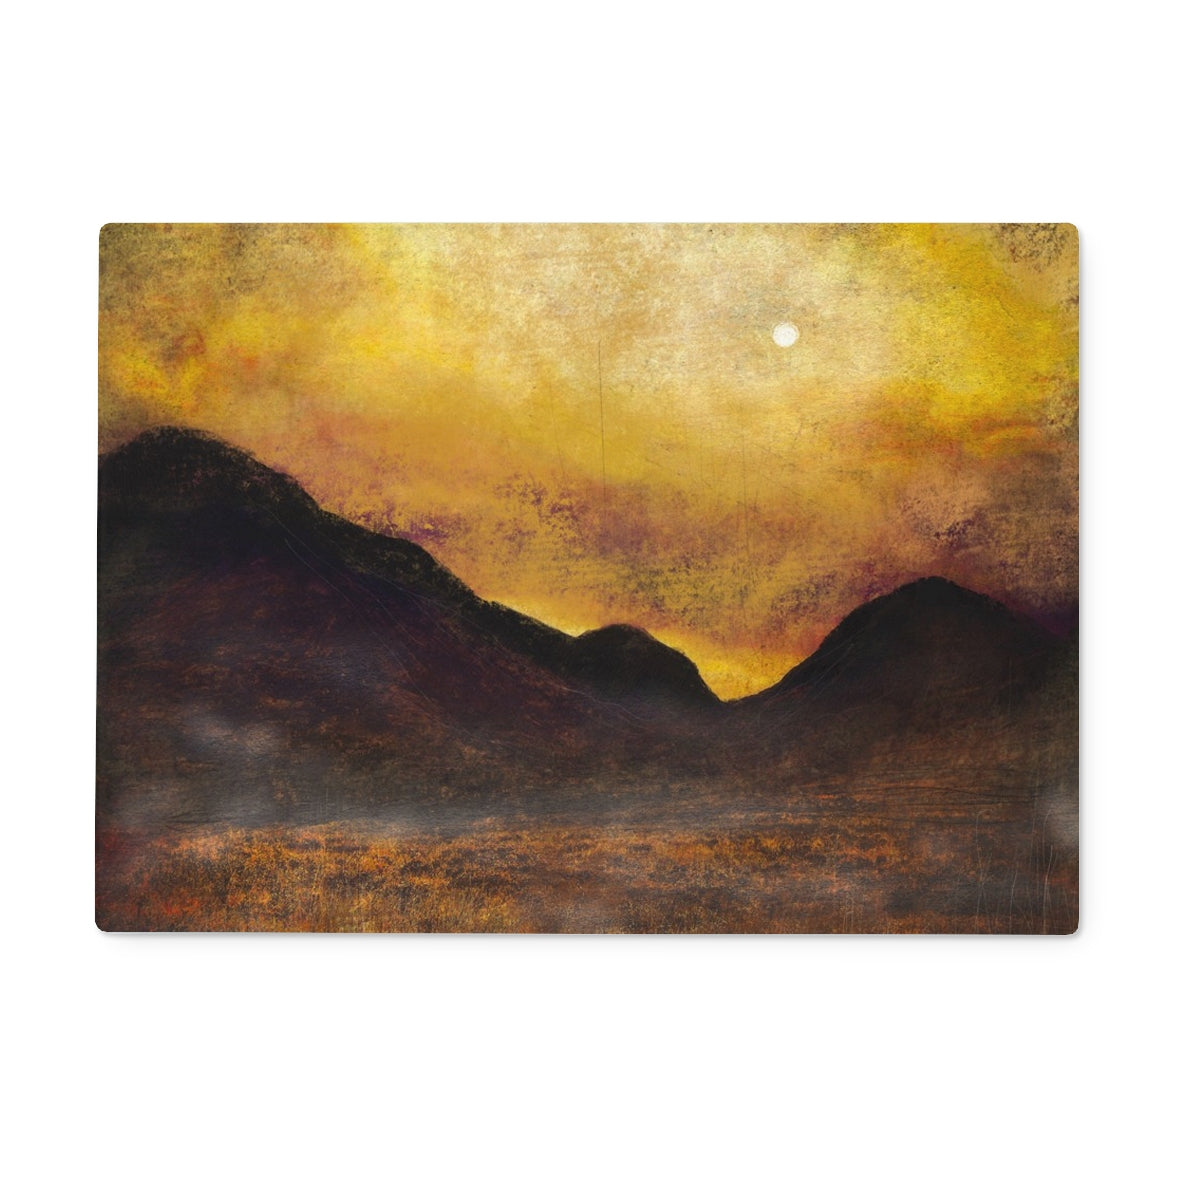 Glencoe Moonlight Art Gifts Glass Chopping Board-Glass Chopping Boards-Glencoe Art Gallery-15"x11" Rectangular-Paintings, Prints, Homeware, Art Gifts From Scotland By Scottish Artist Kevin Hunter